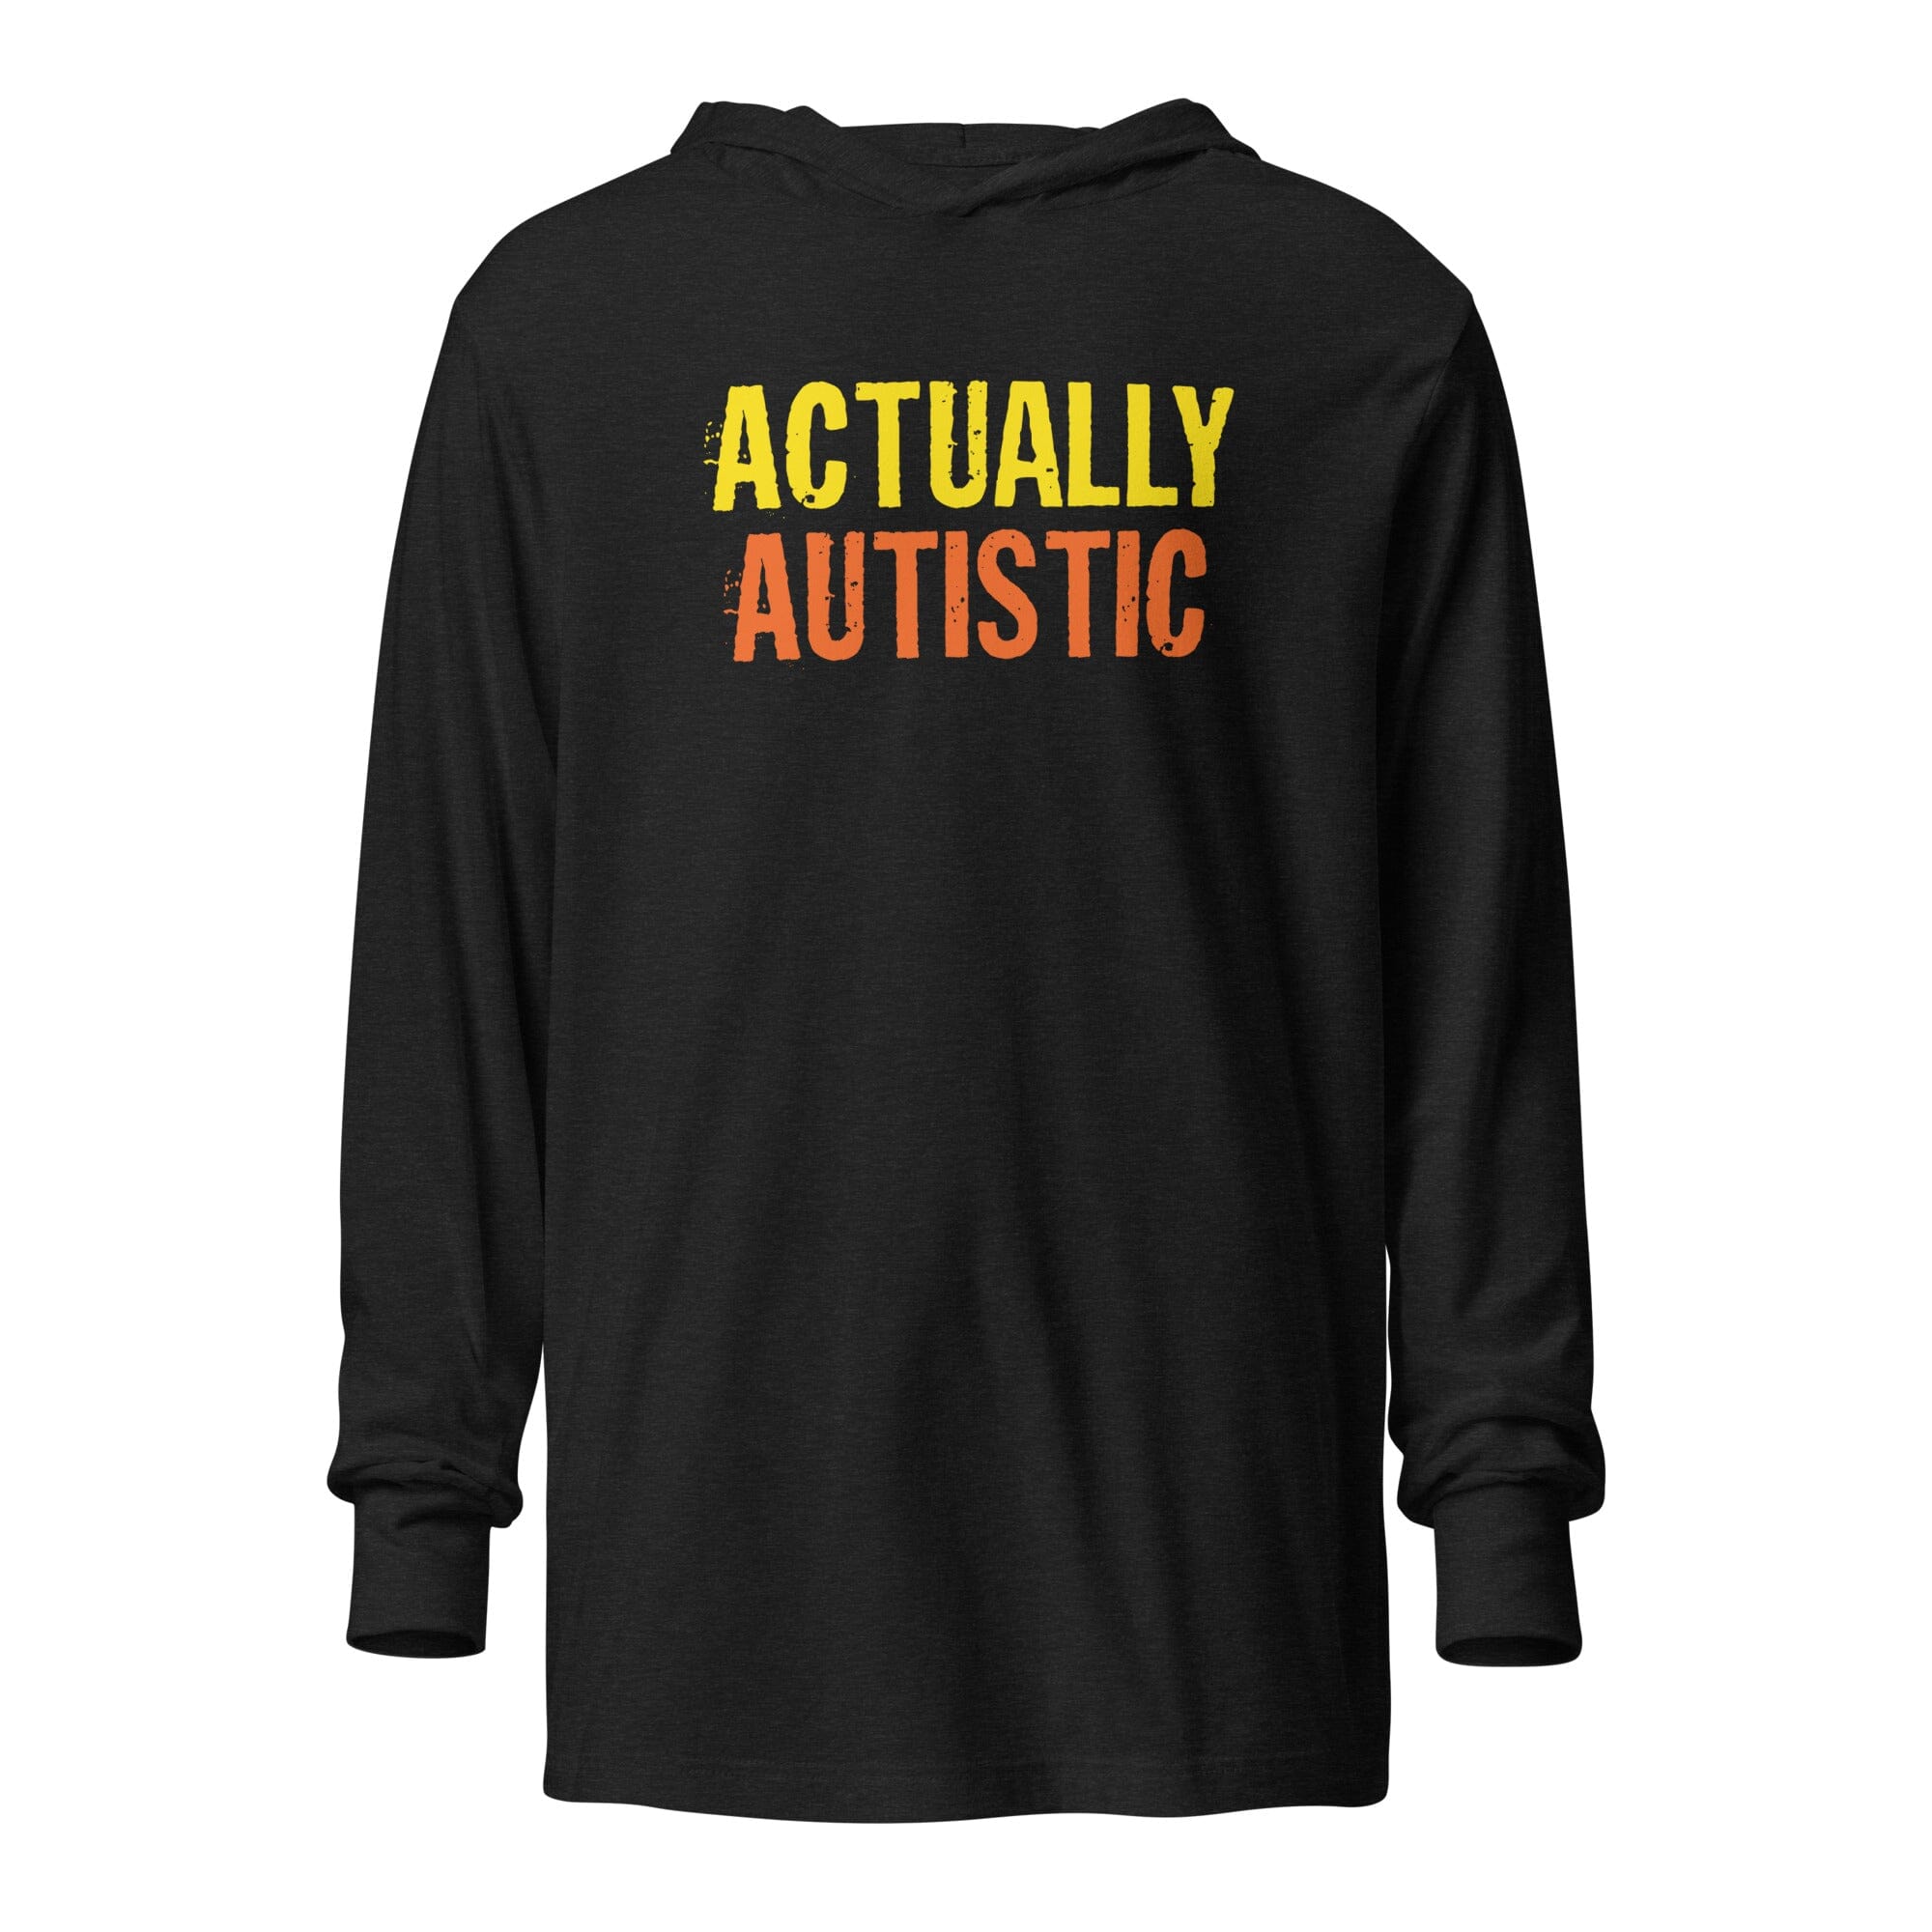 Actually Autistic Unisex Hooded long-sleeve tee The Autistic Innovator Charcoal-Black Triblend XS 